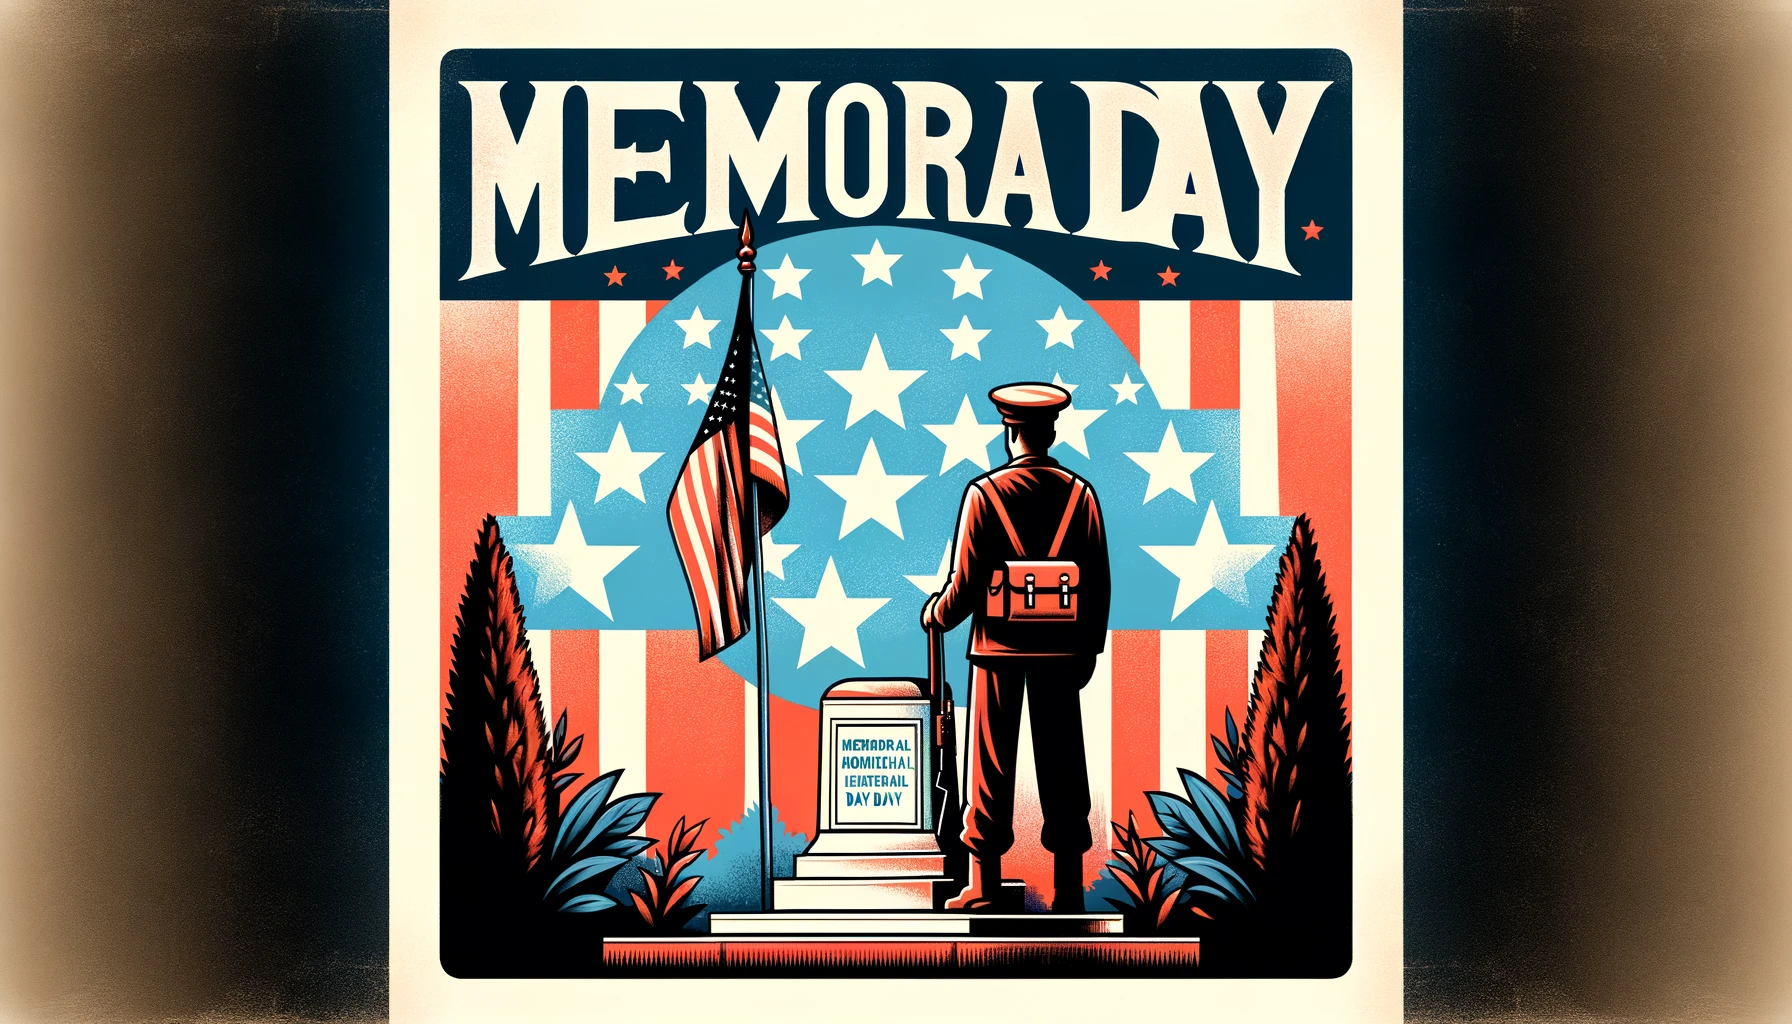 Thoughtful Memorial Day Appreciations for Sacrifices